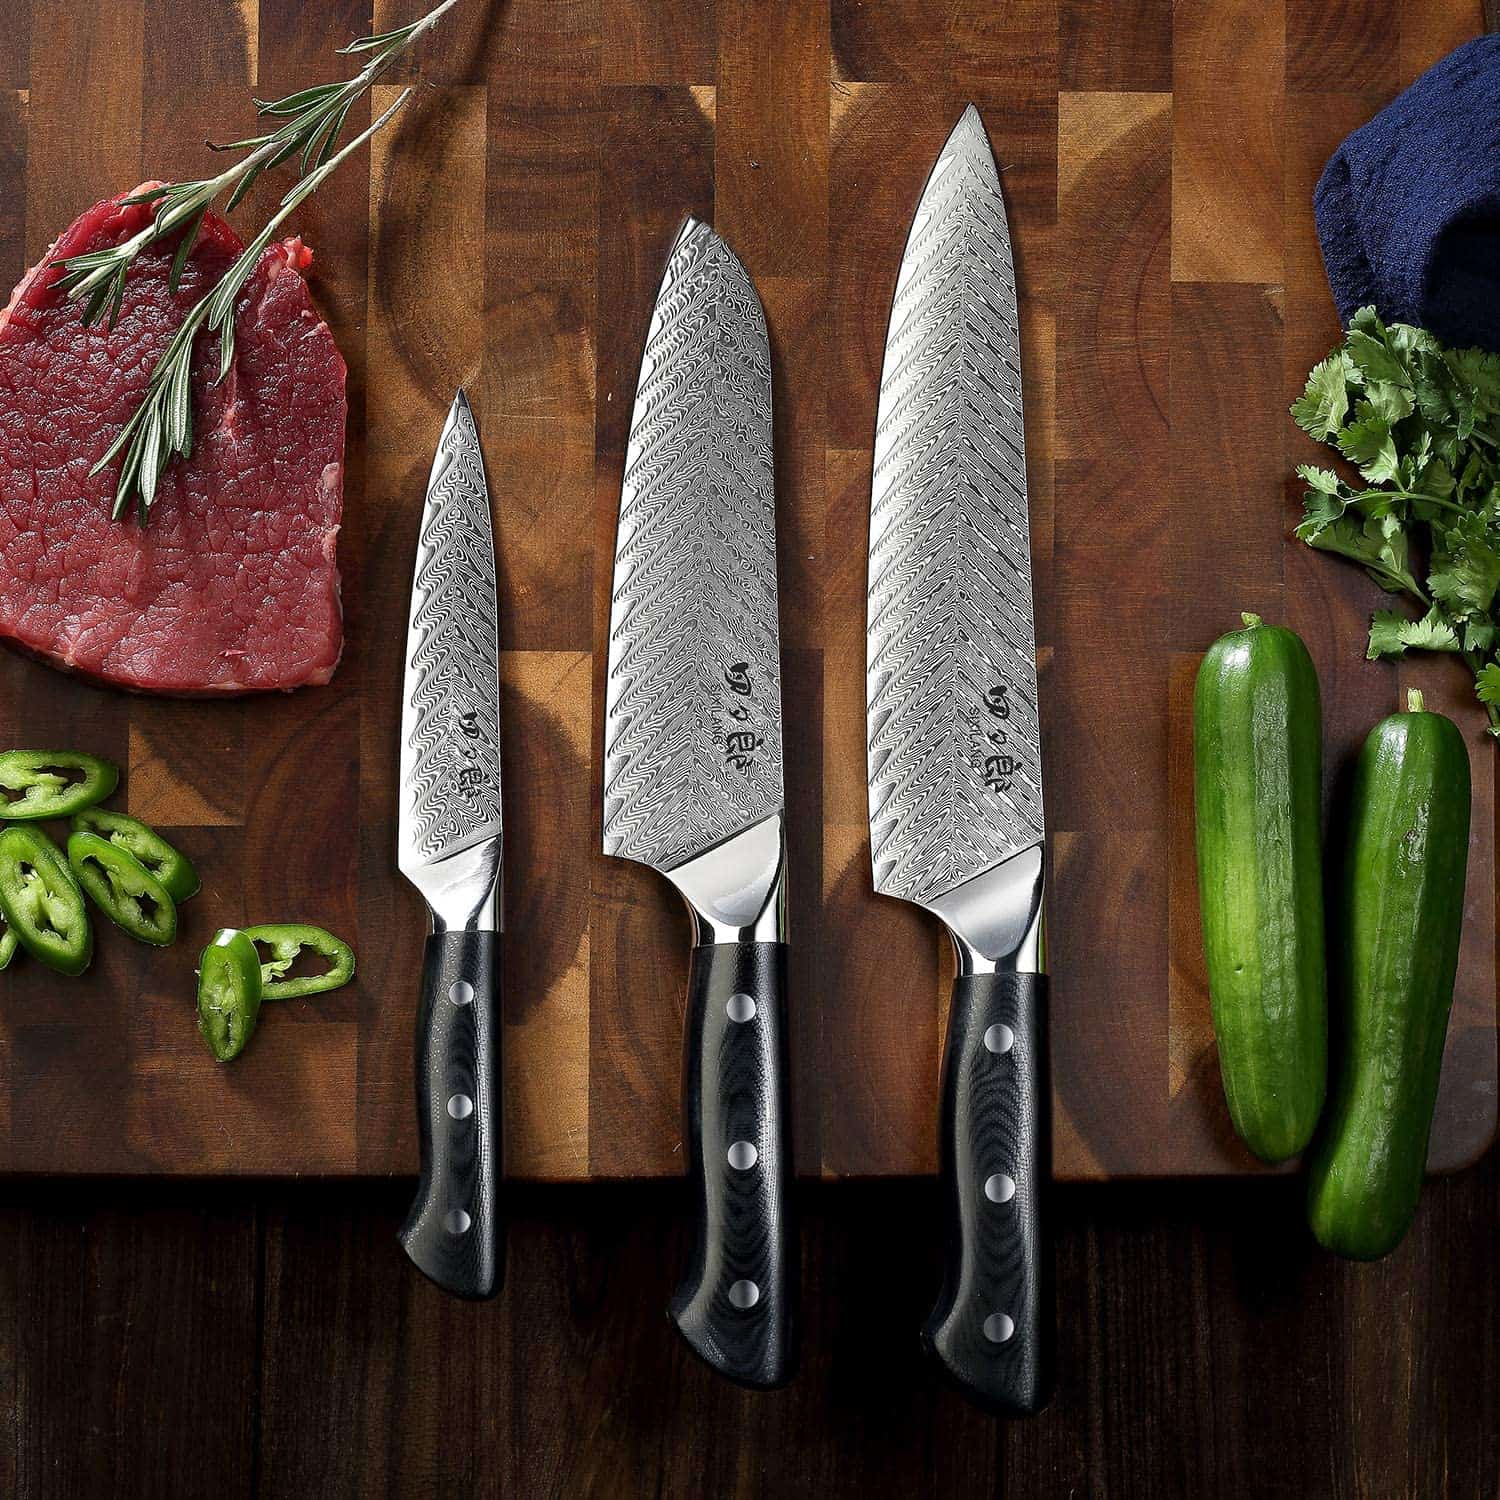 Best budget AUS 10 Japanese steel knife set- SIXILANG Damascus three Kitchen Knives with cutting board